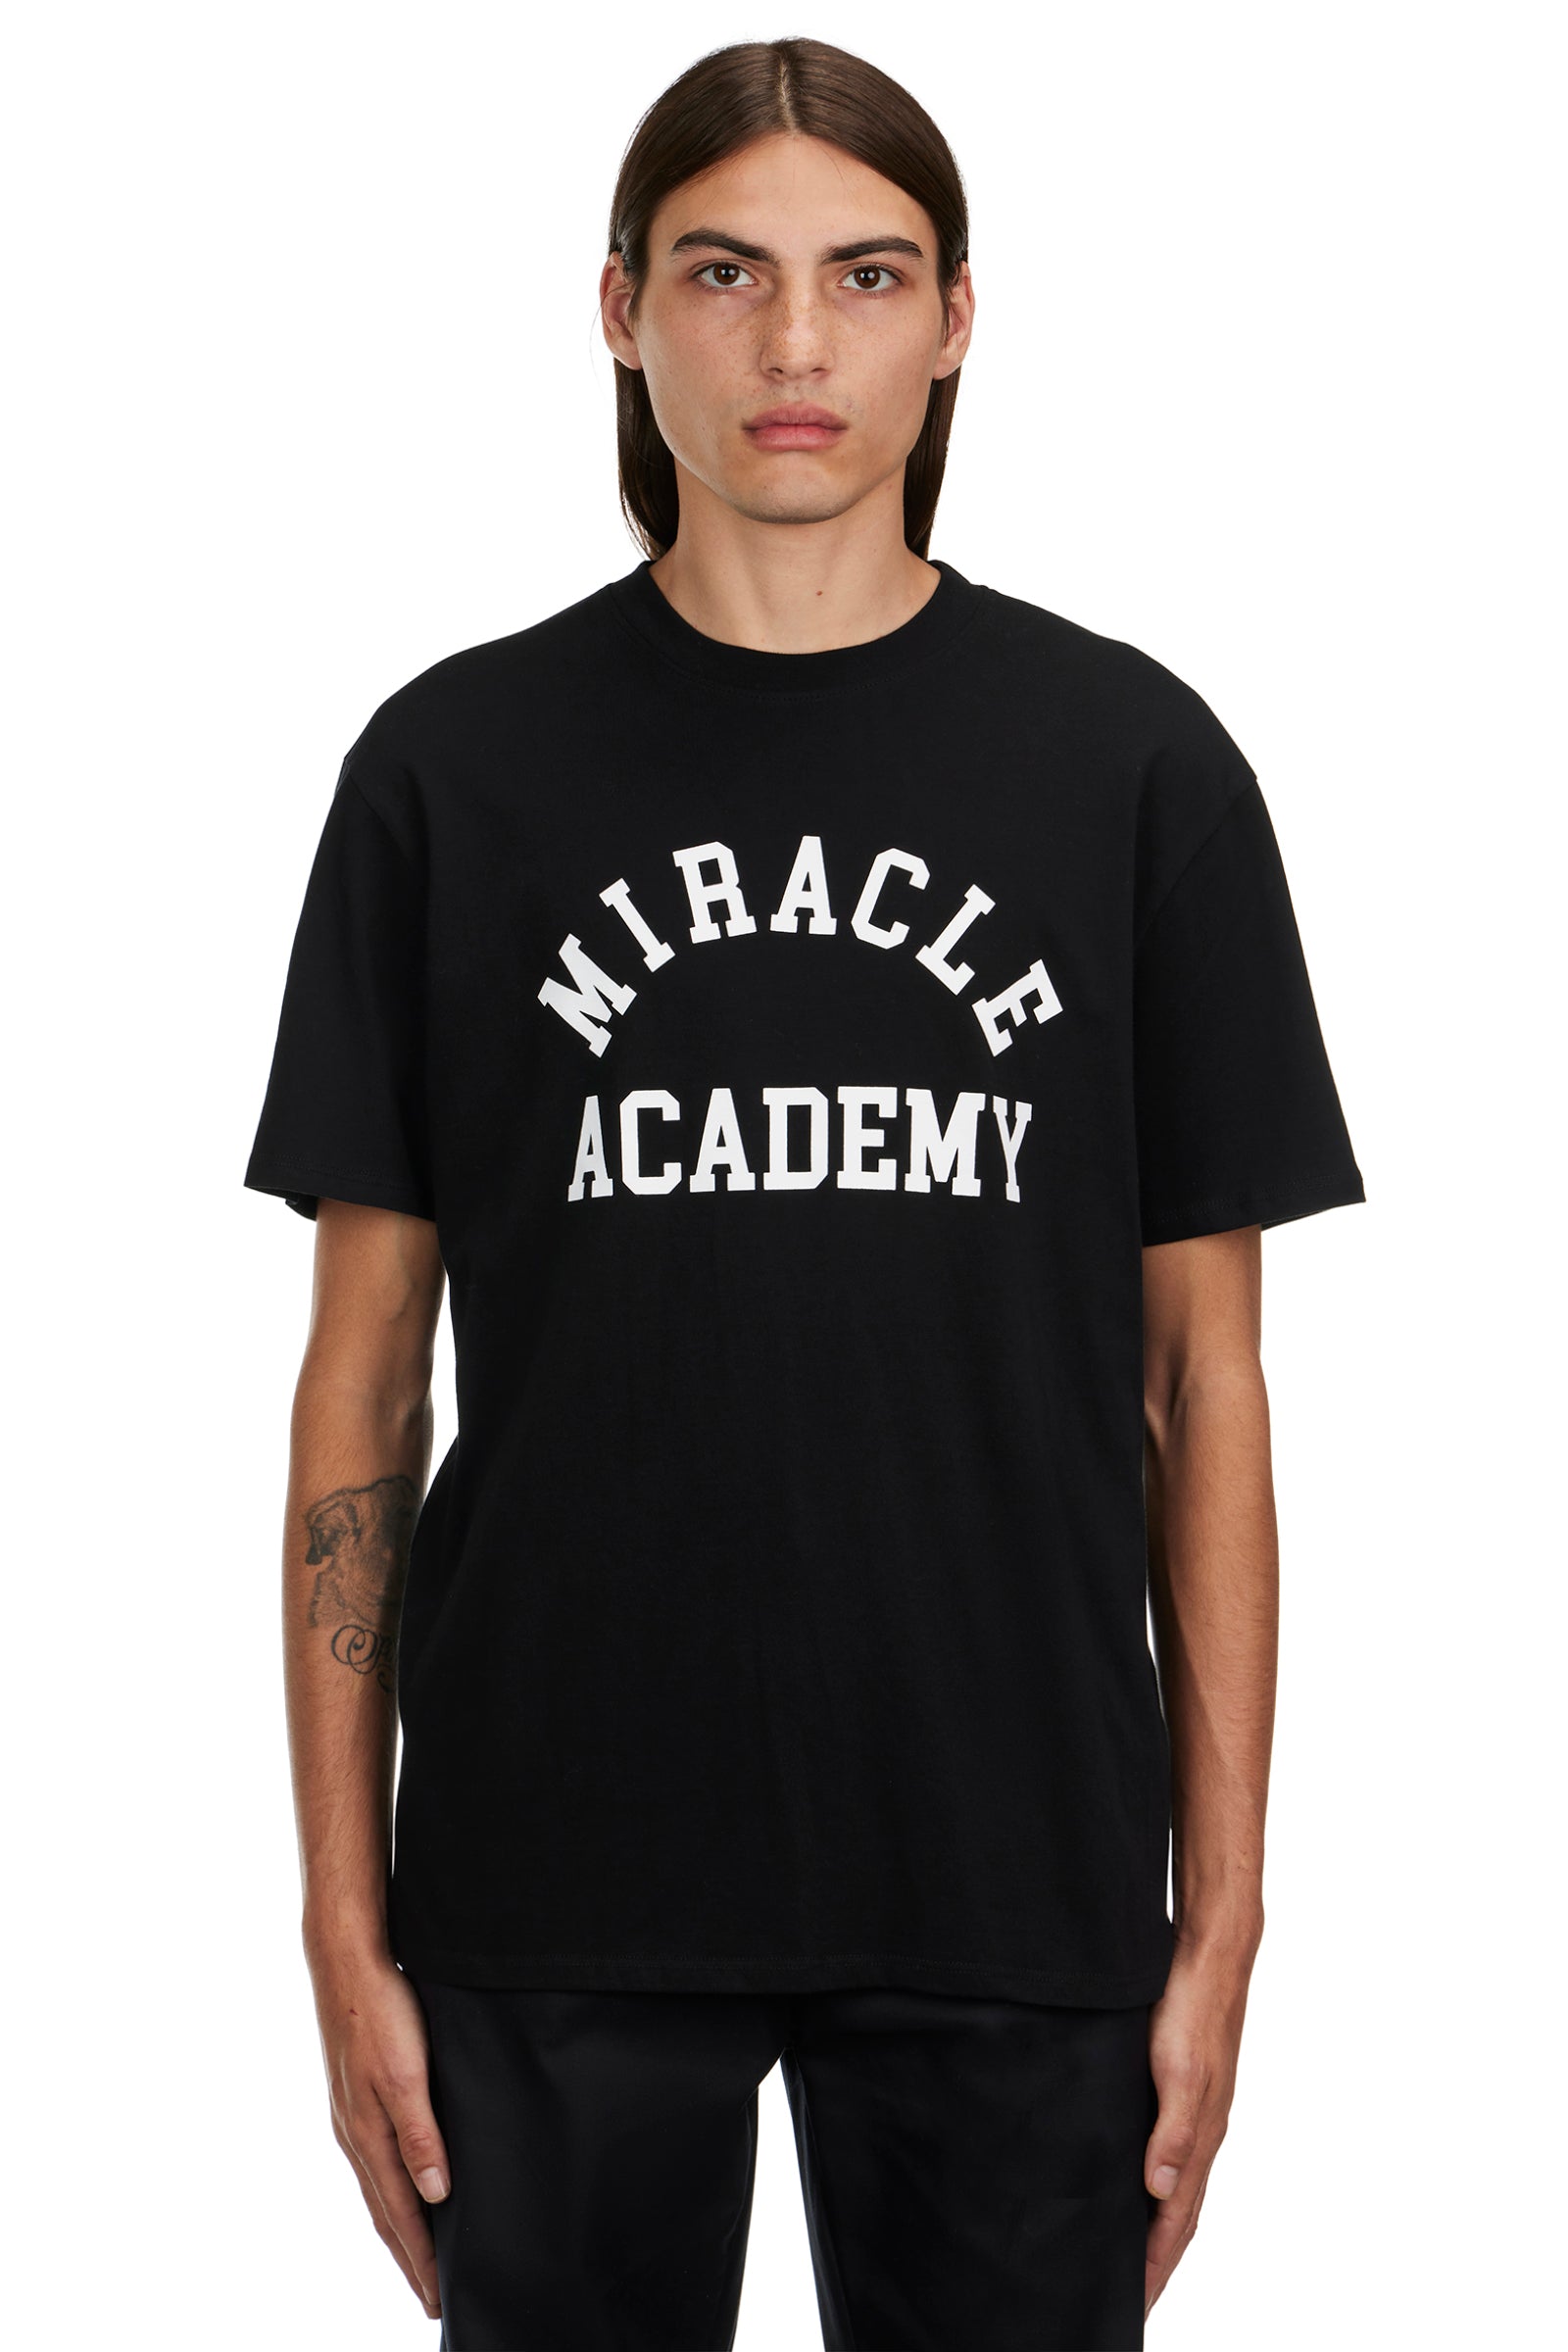 Miracle Academy T-Shirt